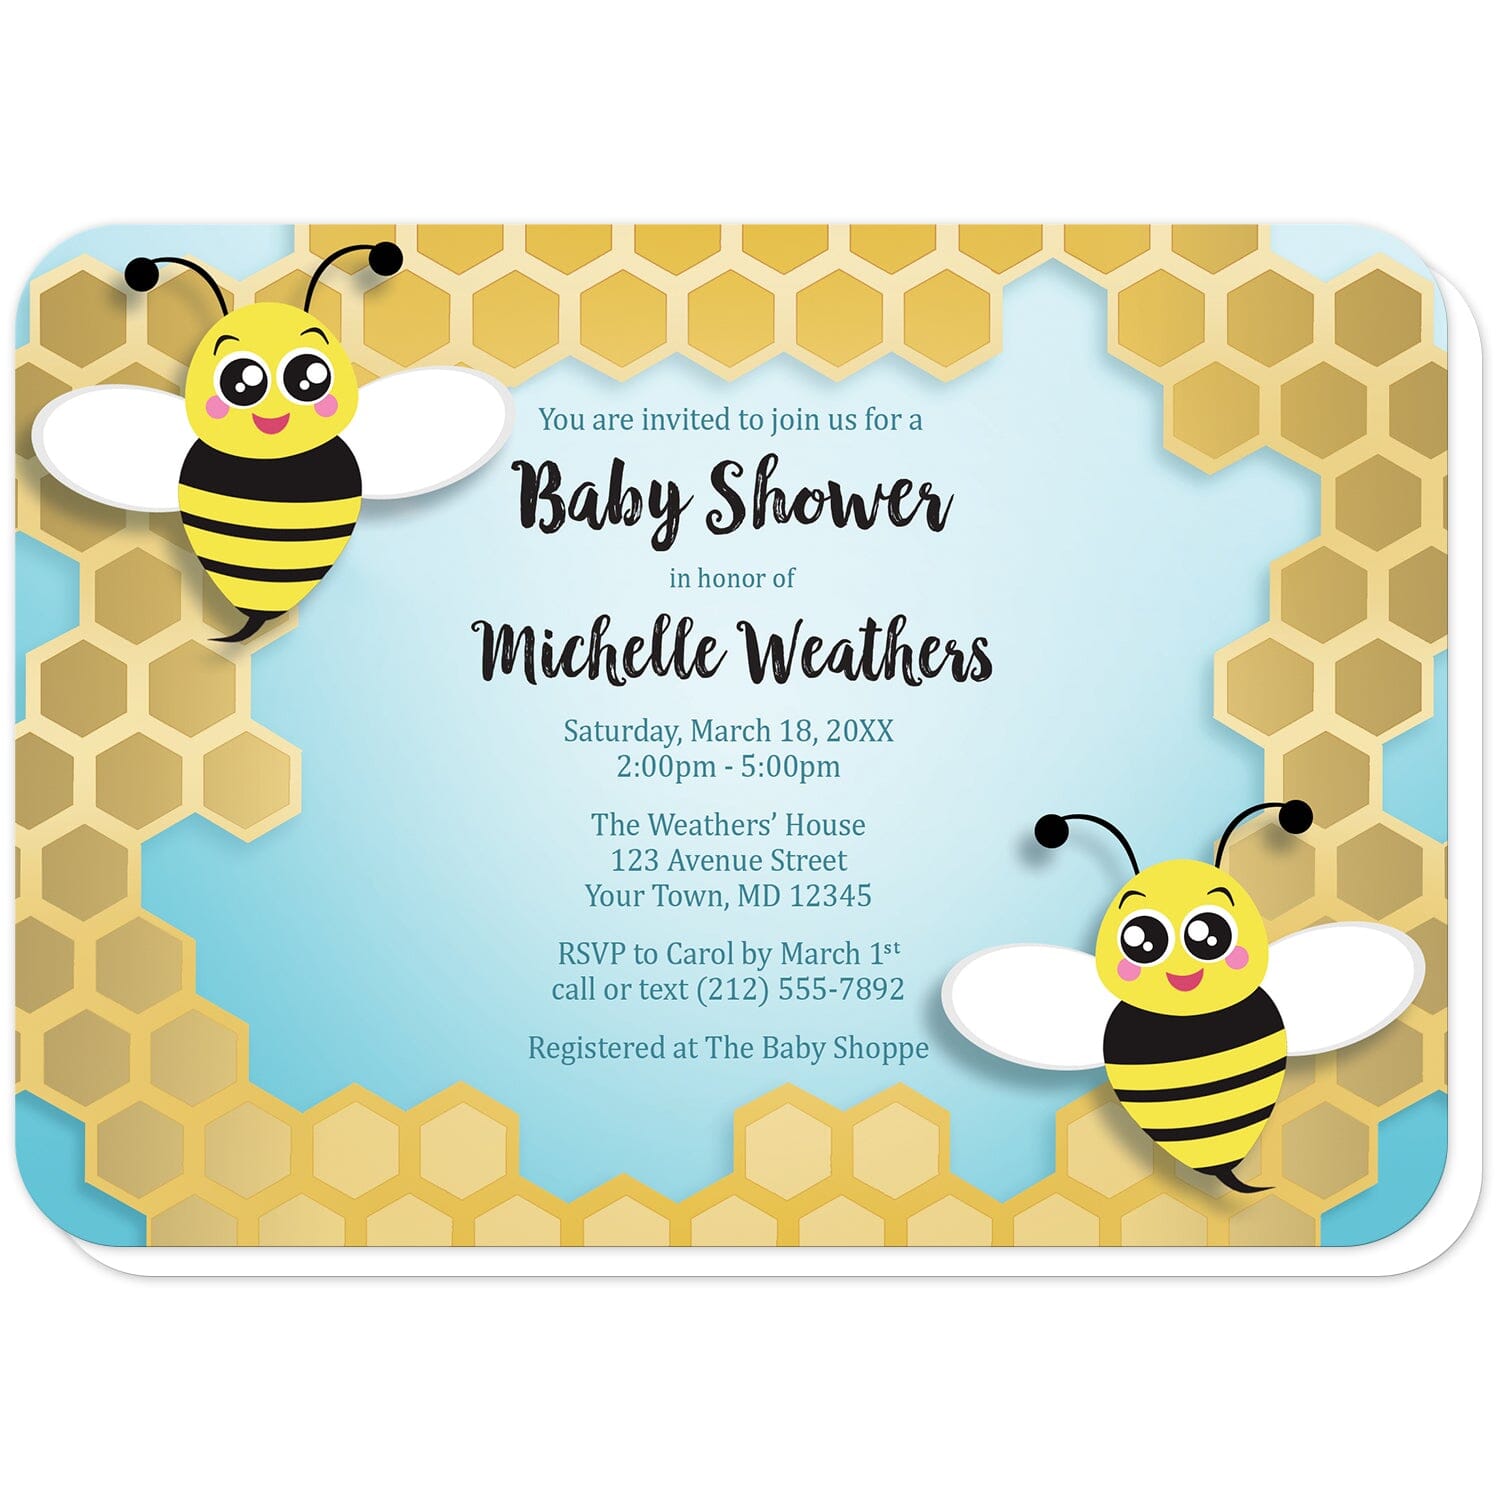 Cute Honeycomb Bee Baby Shower Invitations (with rounded corners) at Artistically Invited. Cute honeycomb bee baby shower invitations illustrated with two cute bees on opposite corners over an irregular golden yellow honeycomb frame design on a turquoise gradient background. The personalized information you provide for your baby shower celebration will be custom printed in black and dark turquoise in the center over the background color.